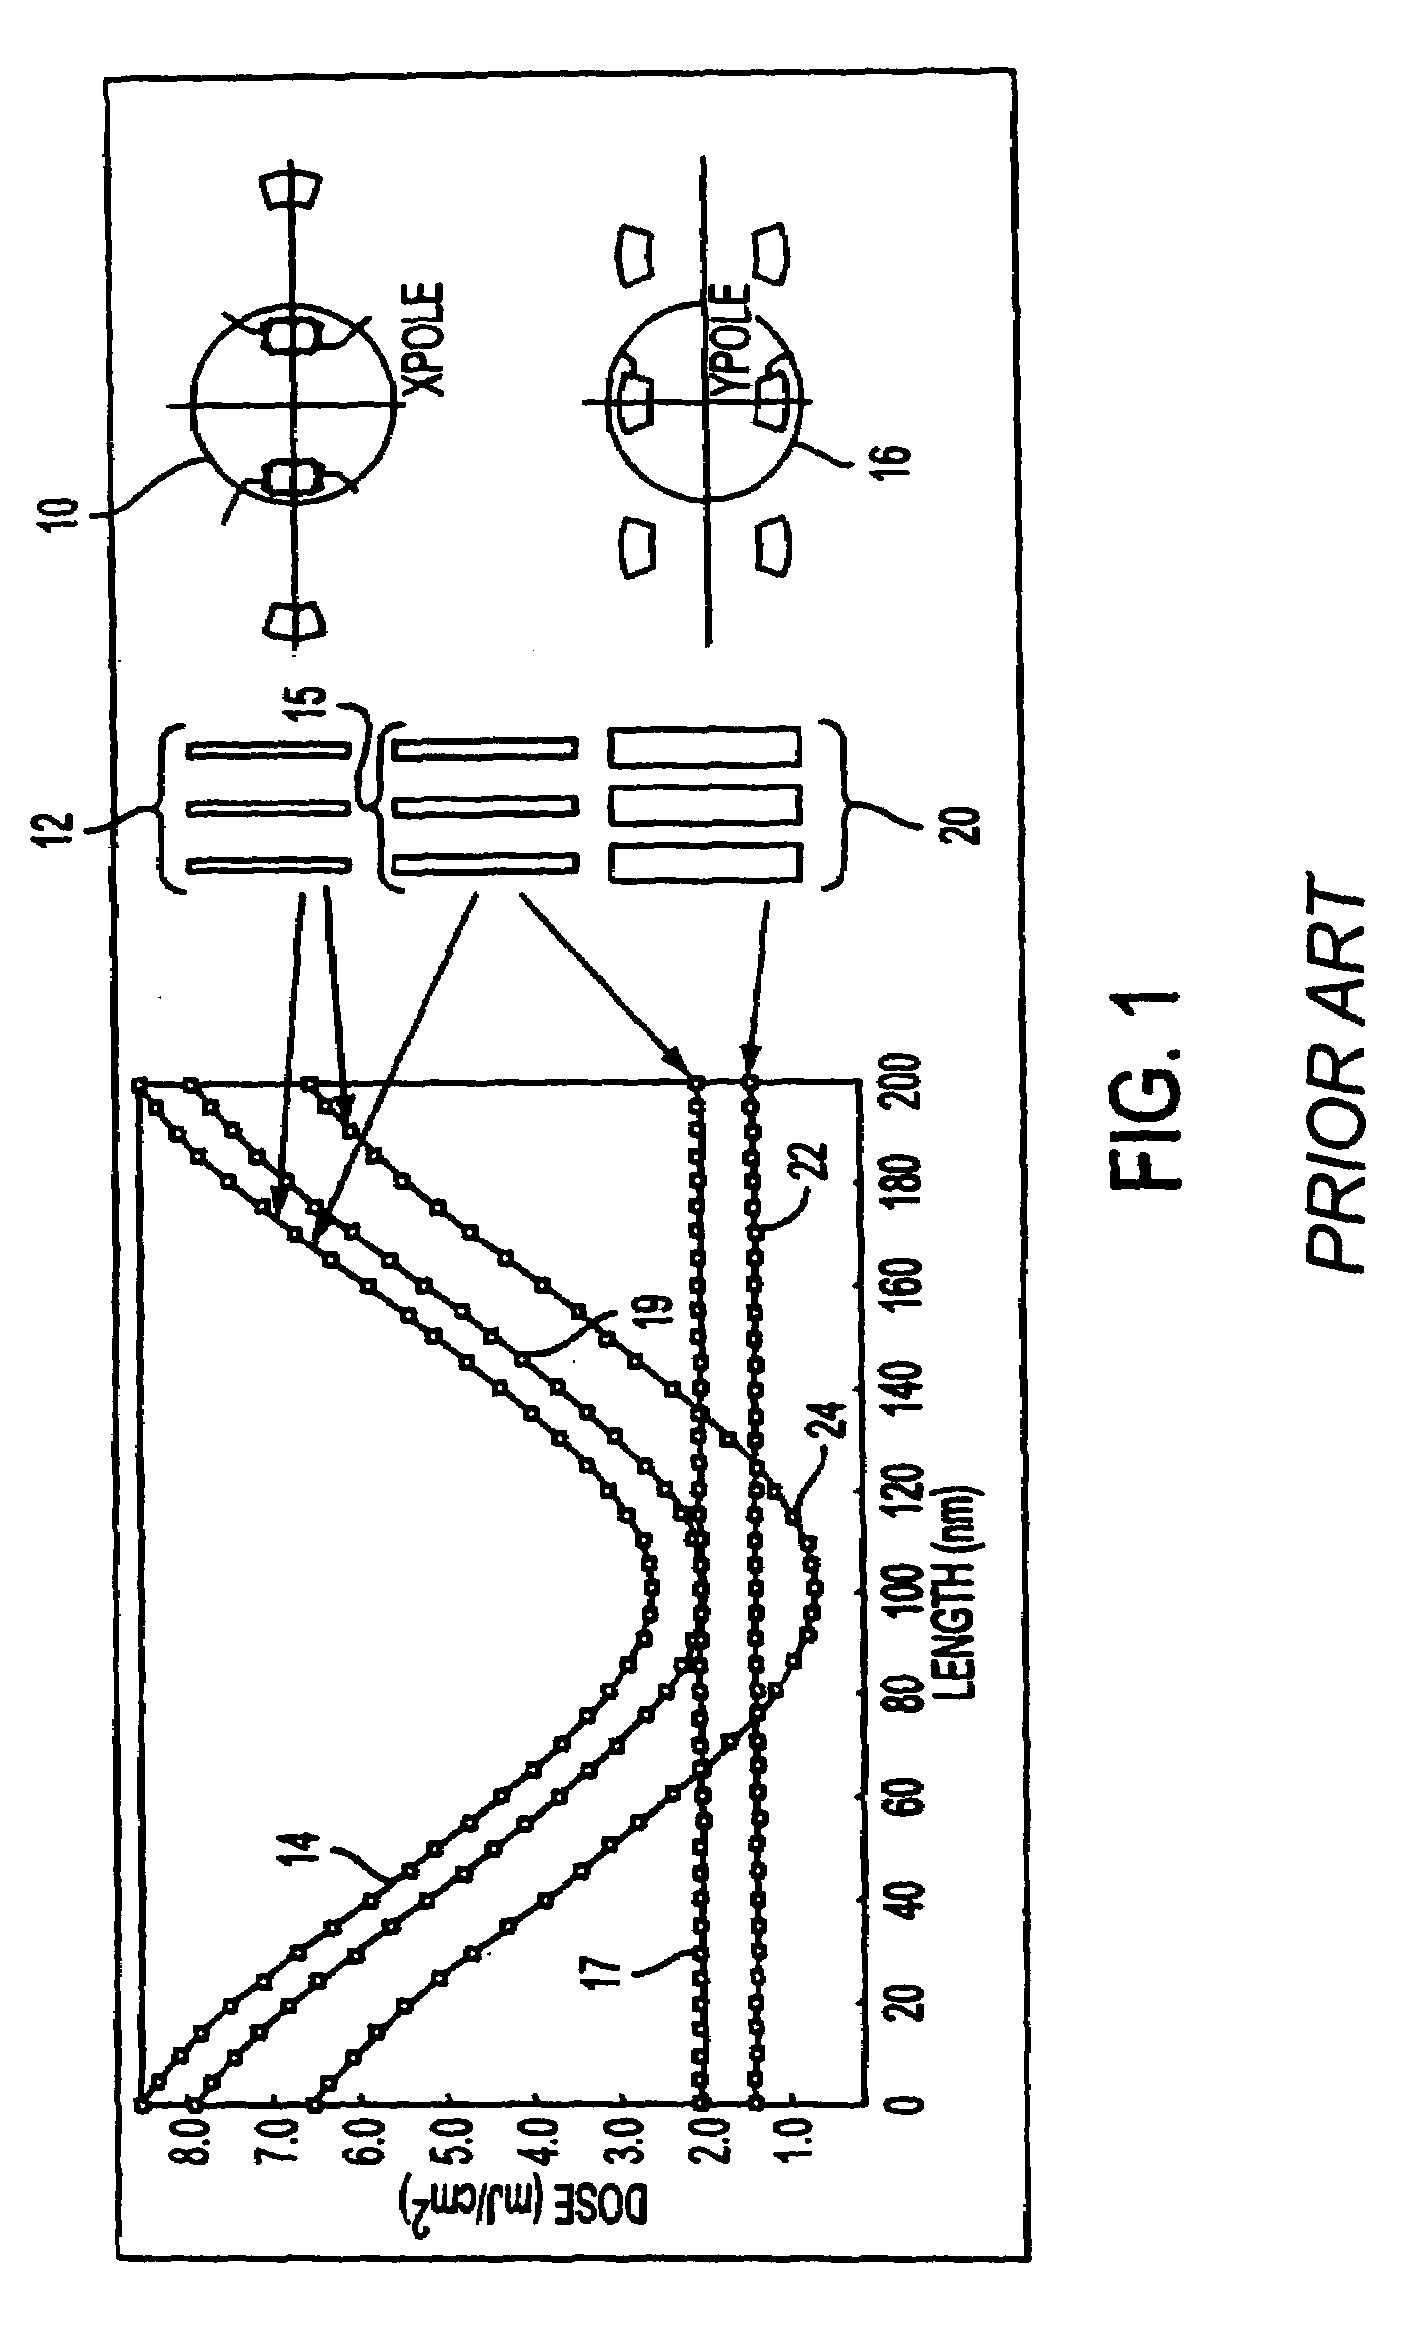 Orientation dependent shielding for use with dipole illumination techniques